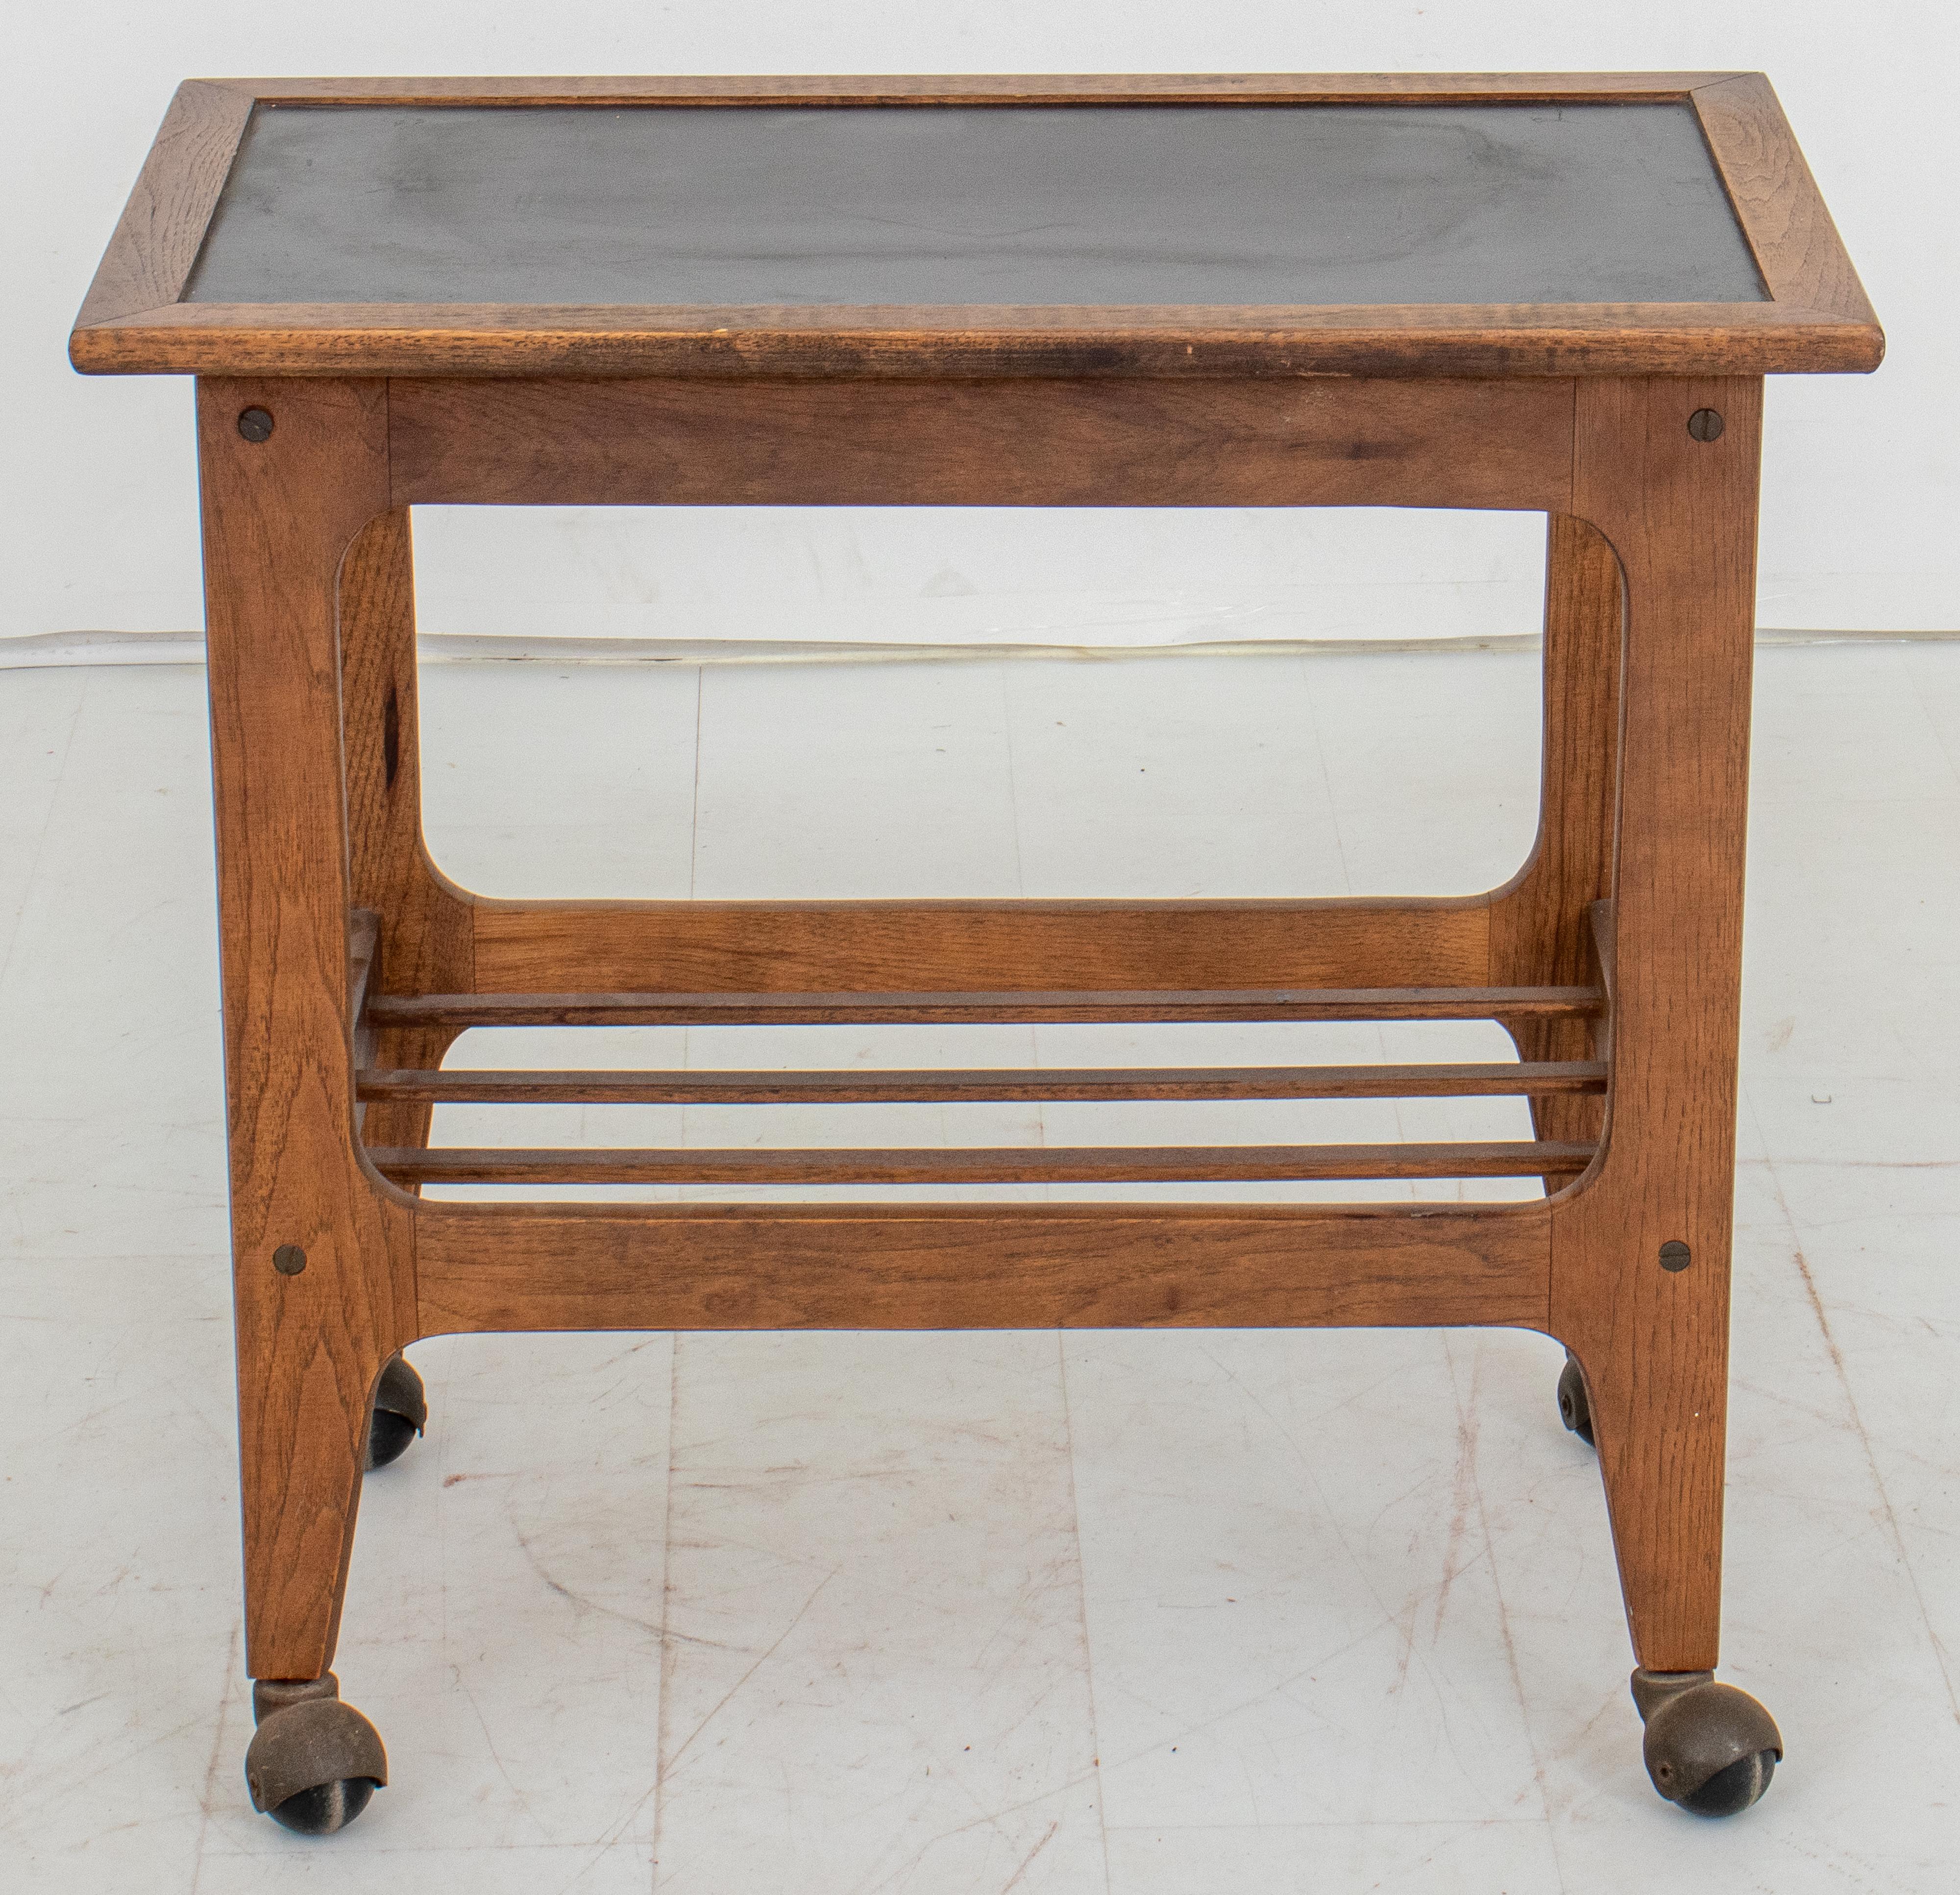 Black topped wooden rolling table bar cart, rectangular with four square legs conjoined by a spindled undertier terminating in four casters.

Dealer: S138XX